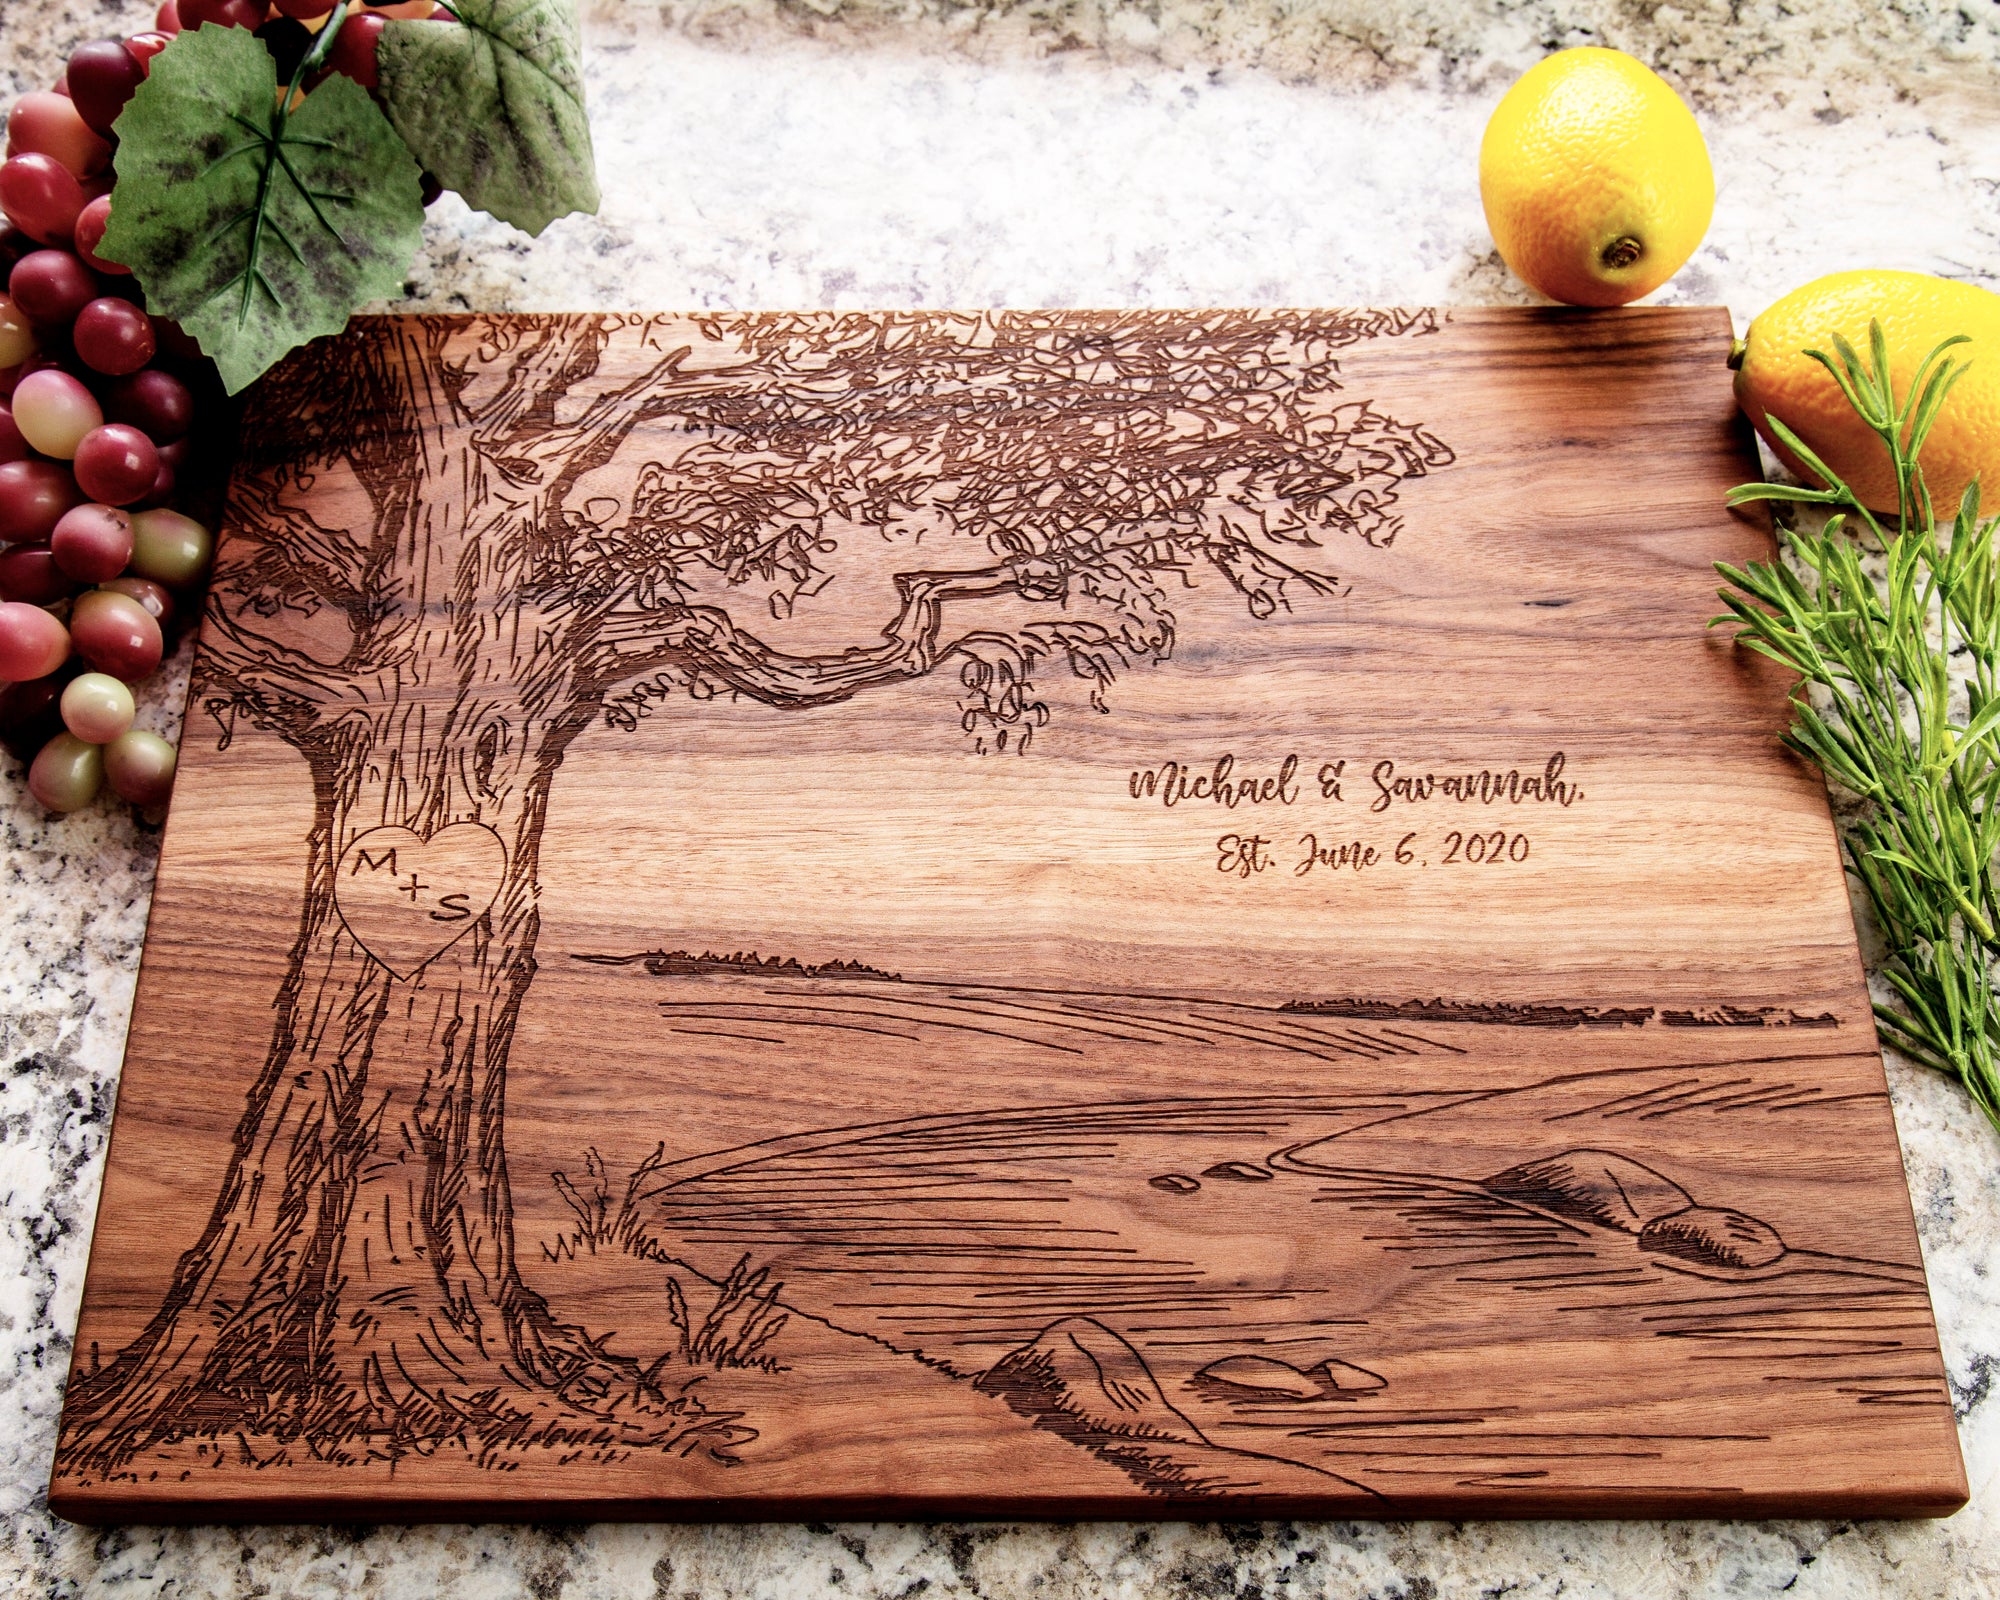 This elegant River Scene Design Cutting Board with Initials Inside a Heart is an ideal wedding or anniversary present. Constructed with superior oak wood, it's sure to be a treasured memory for many years. An unforgettable way to honor any celebration!